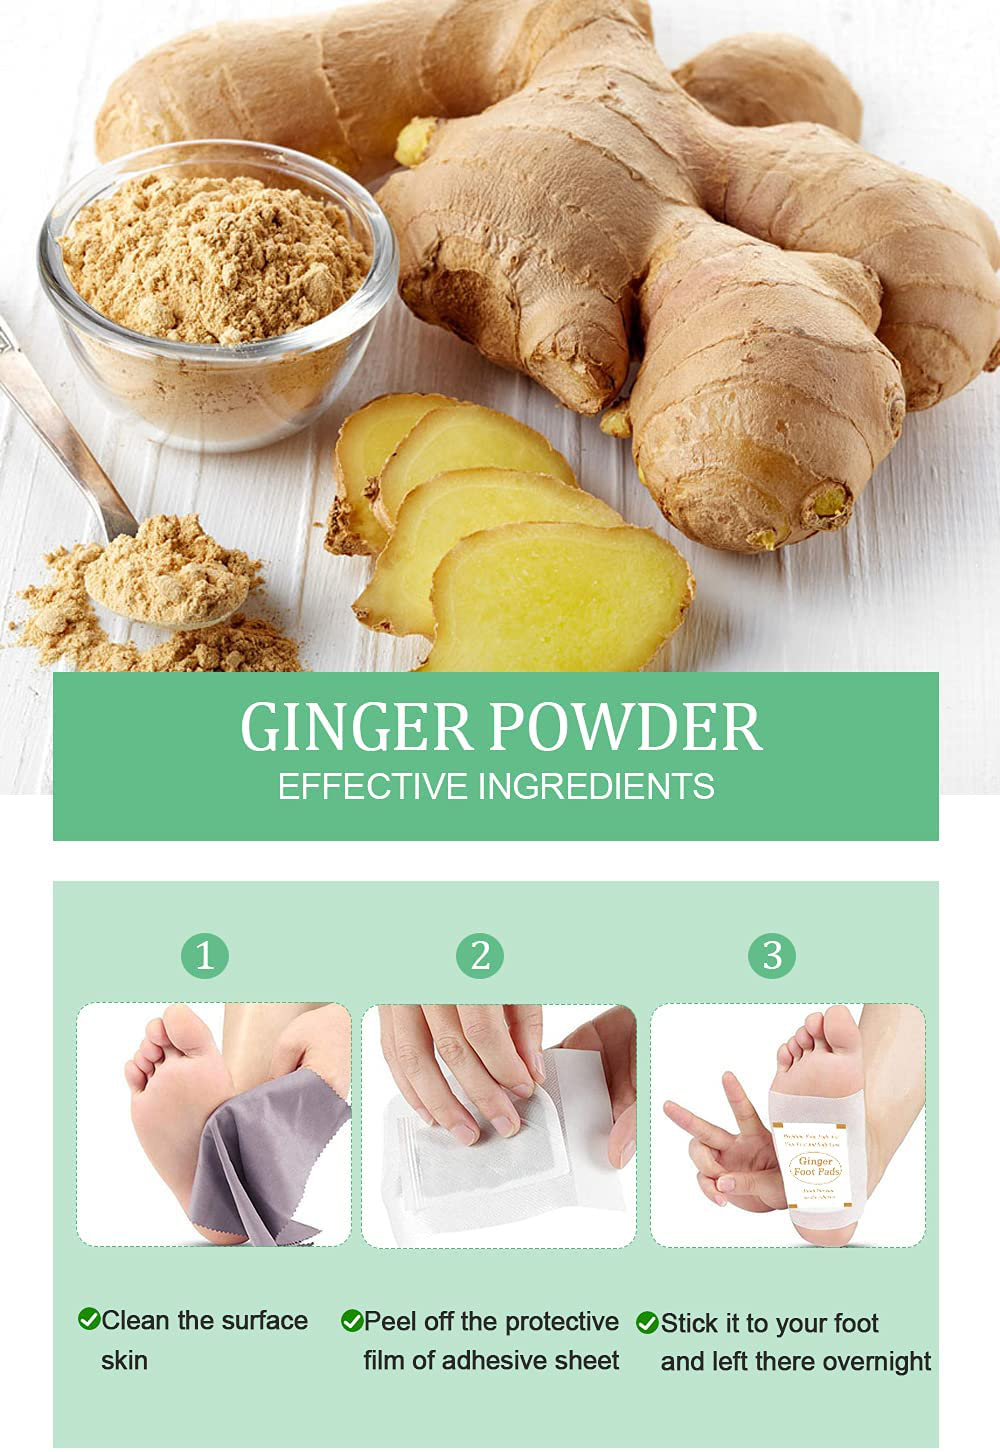 Foot Pads | Ginger Foot Pads for Your Good Feet | Foot and Body Care | Apply, Sleep & Feel Better | All Natural & Premium Ingredients for Best Combination & Results | 20 PCS